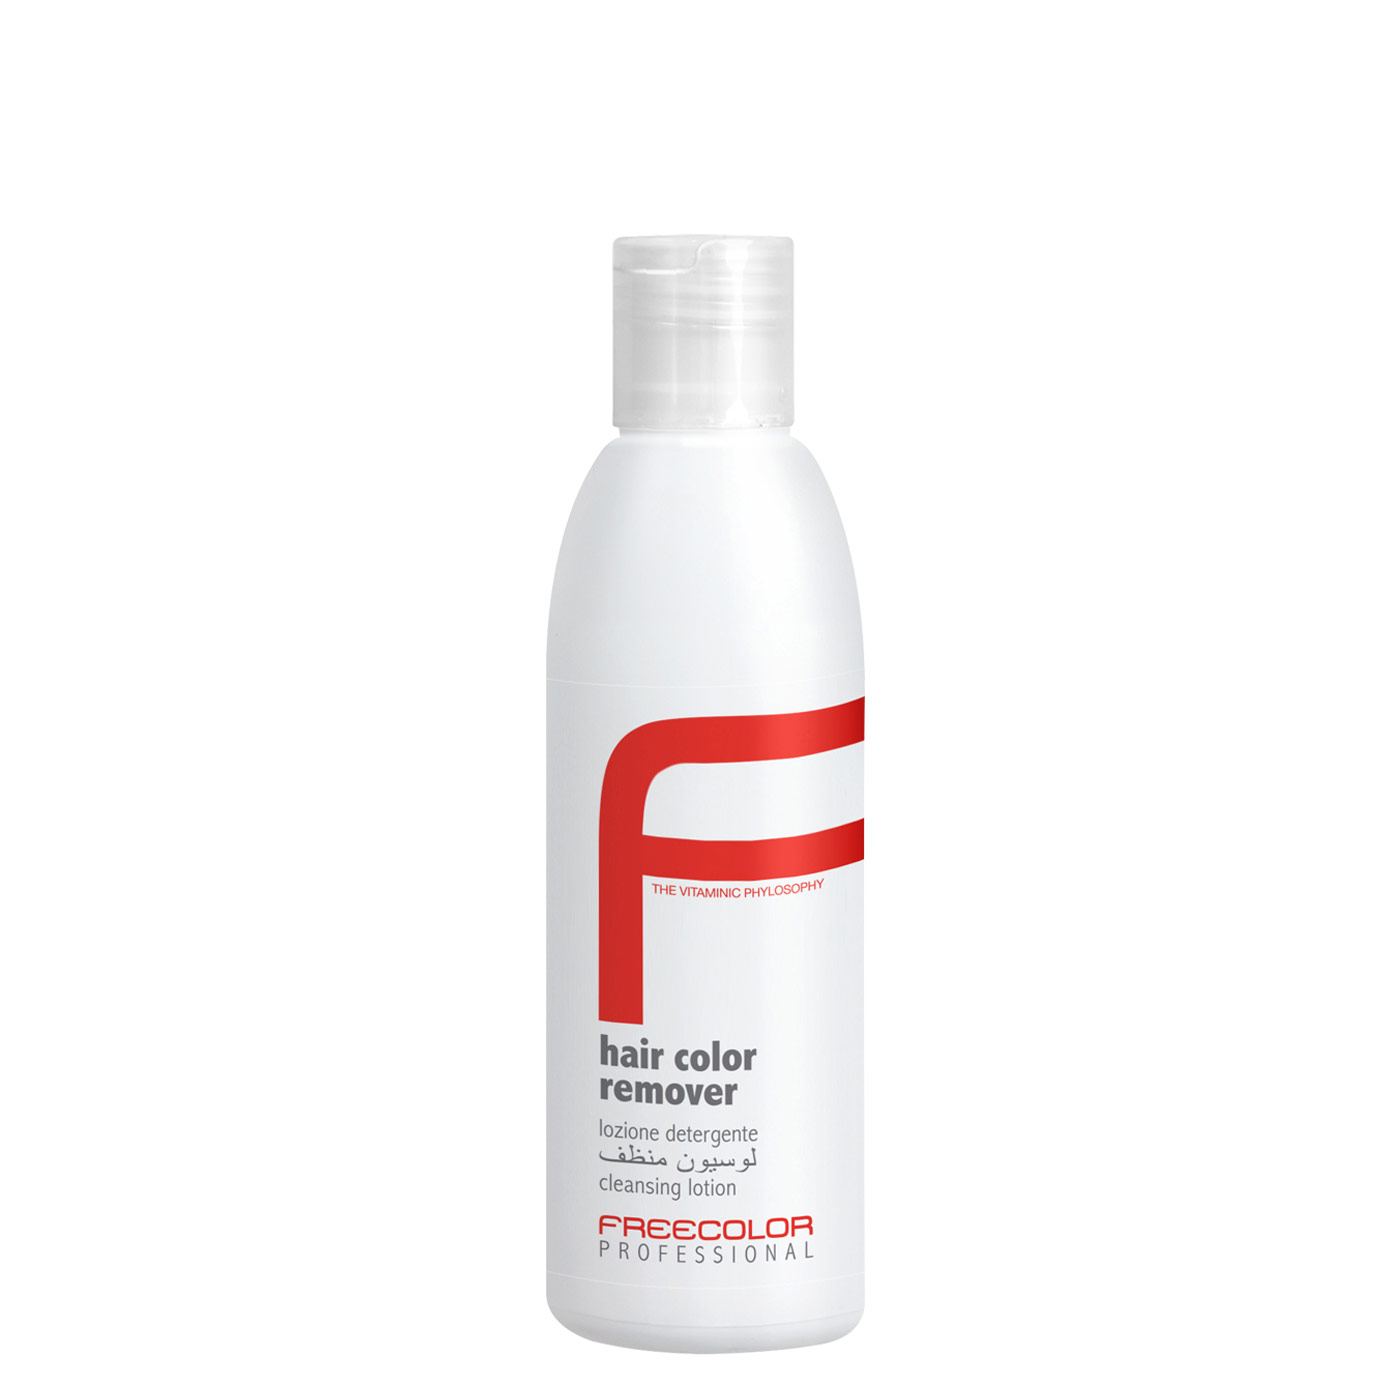 https://www.oystercosmetics.com/es/wp-content/uploads/sites/3/2020/09/FREECOLOR-HAIR-COLOR-REMOVER-150-ML-1.jpg